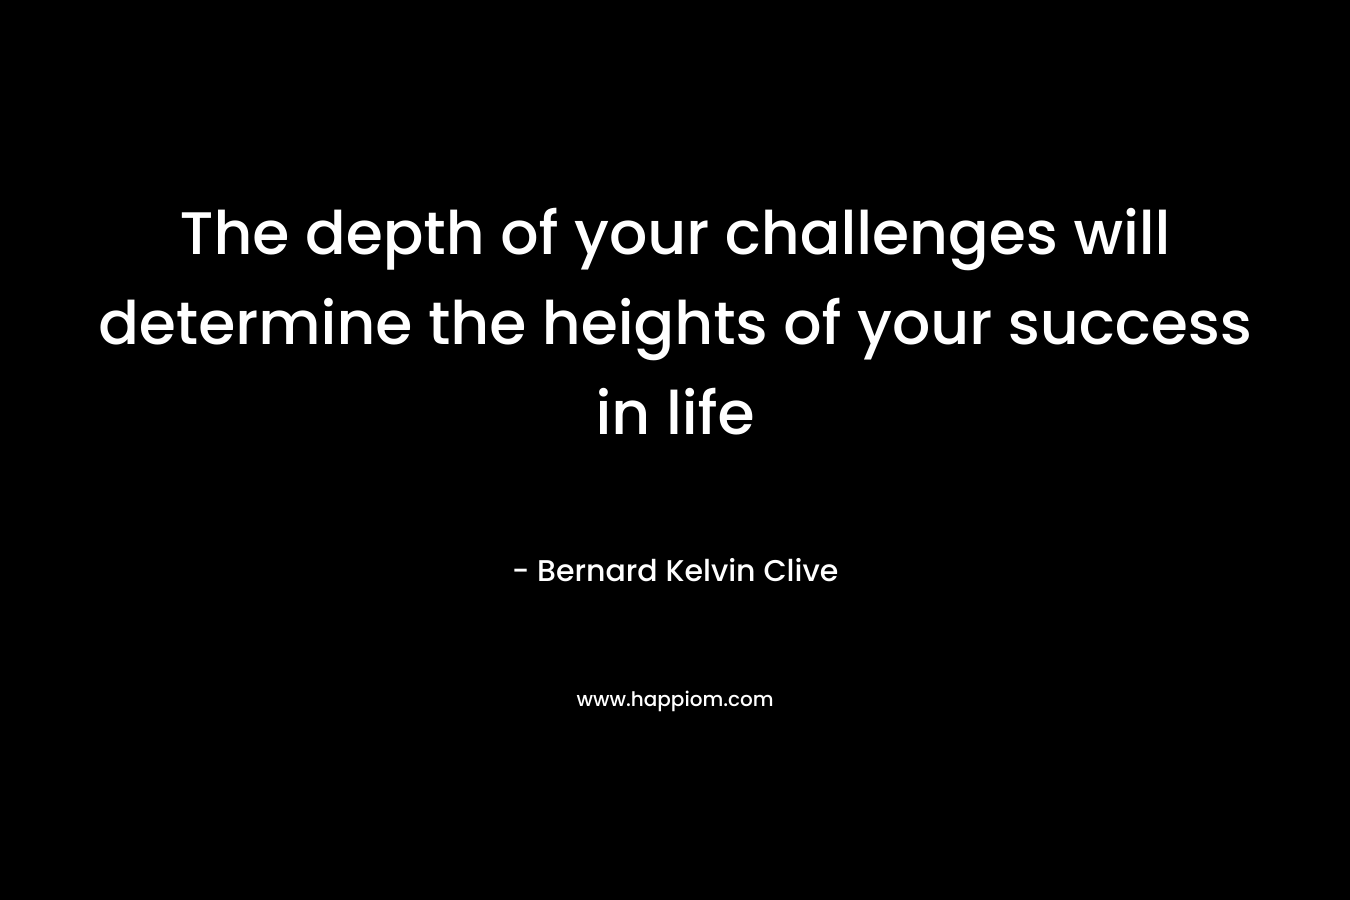 The depth of your challenges will determine the heights of your success in life